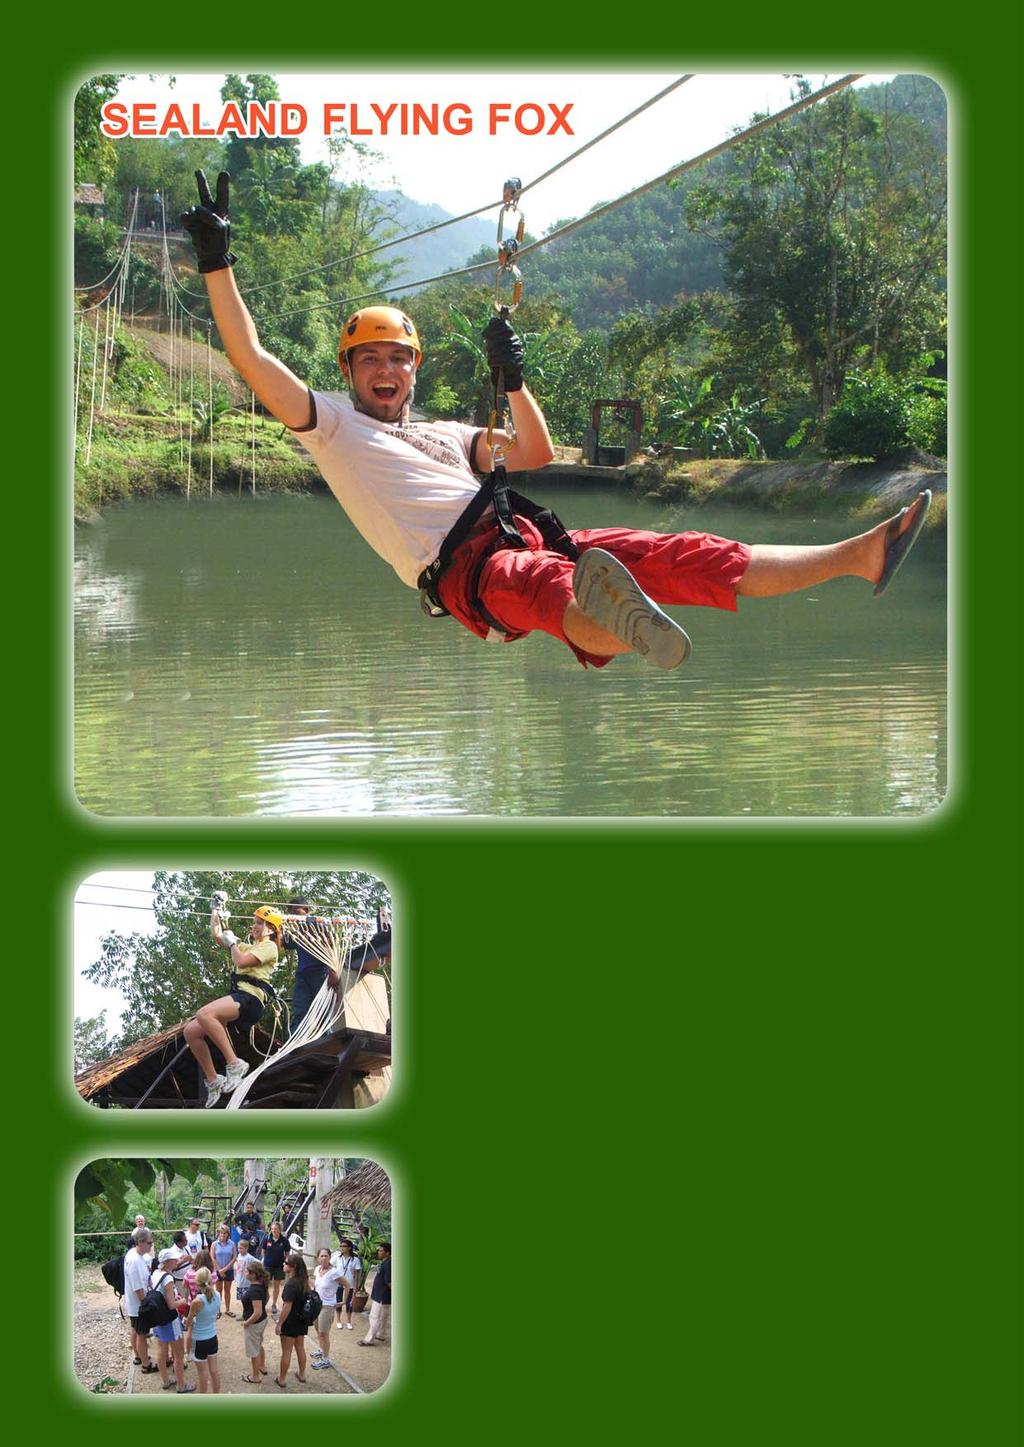 Sealand Flying Fox Tour Code (SLC 03) This thrilling activity is available for both adults and children, offers a new way of excitement.